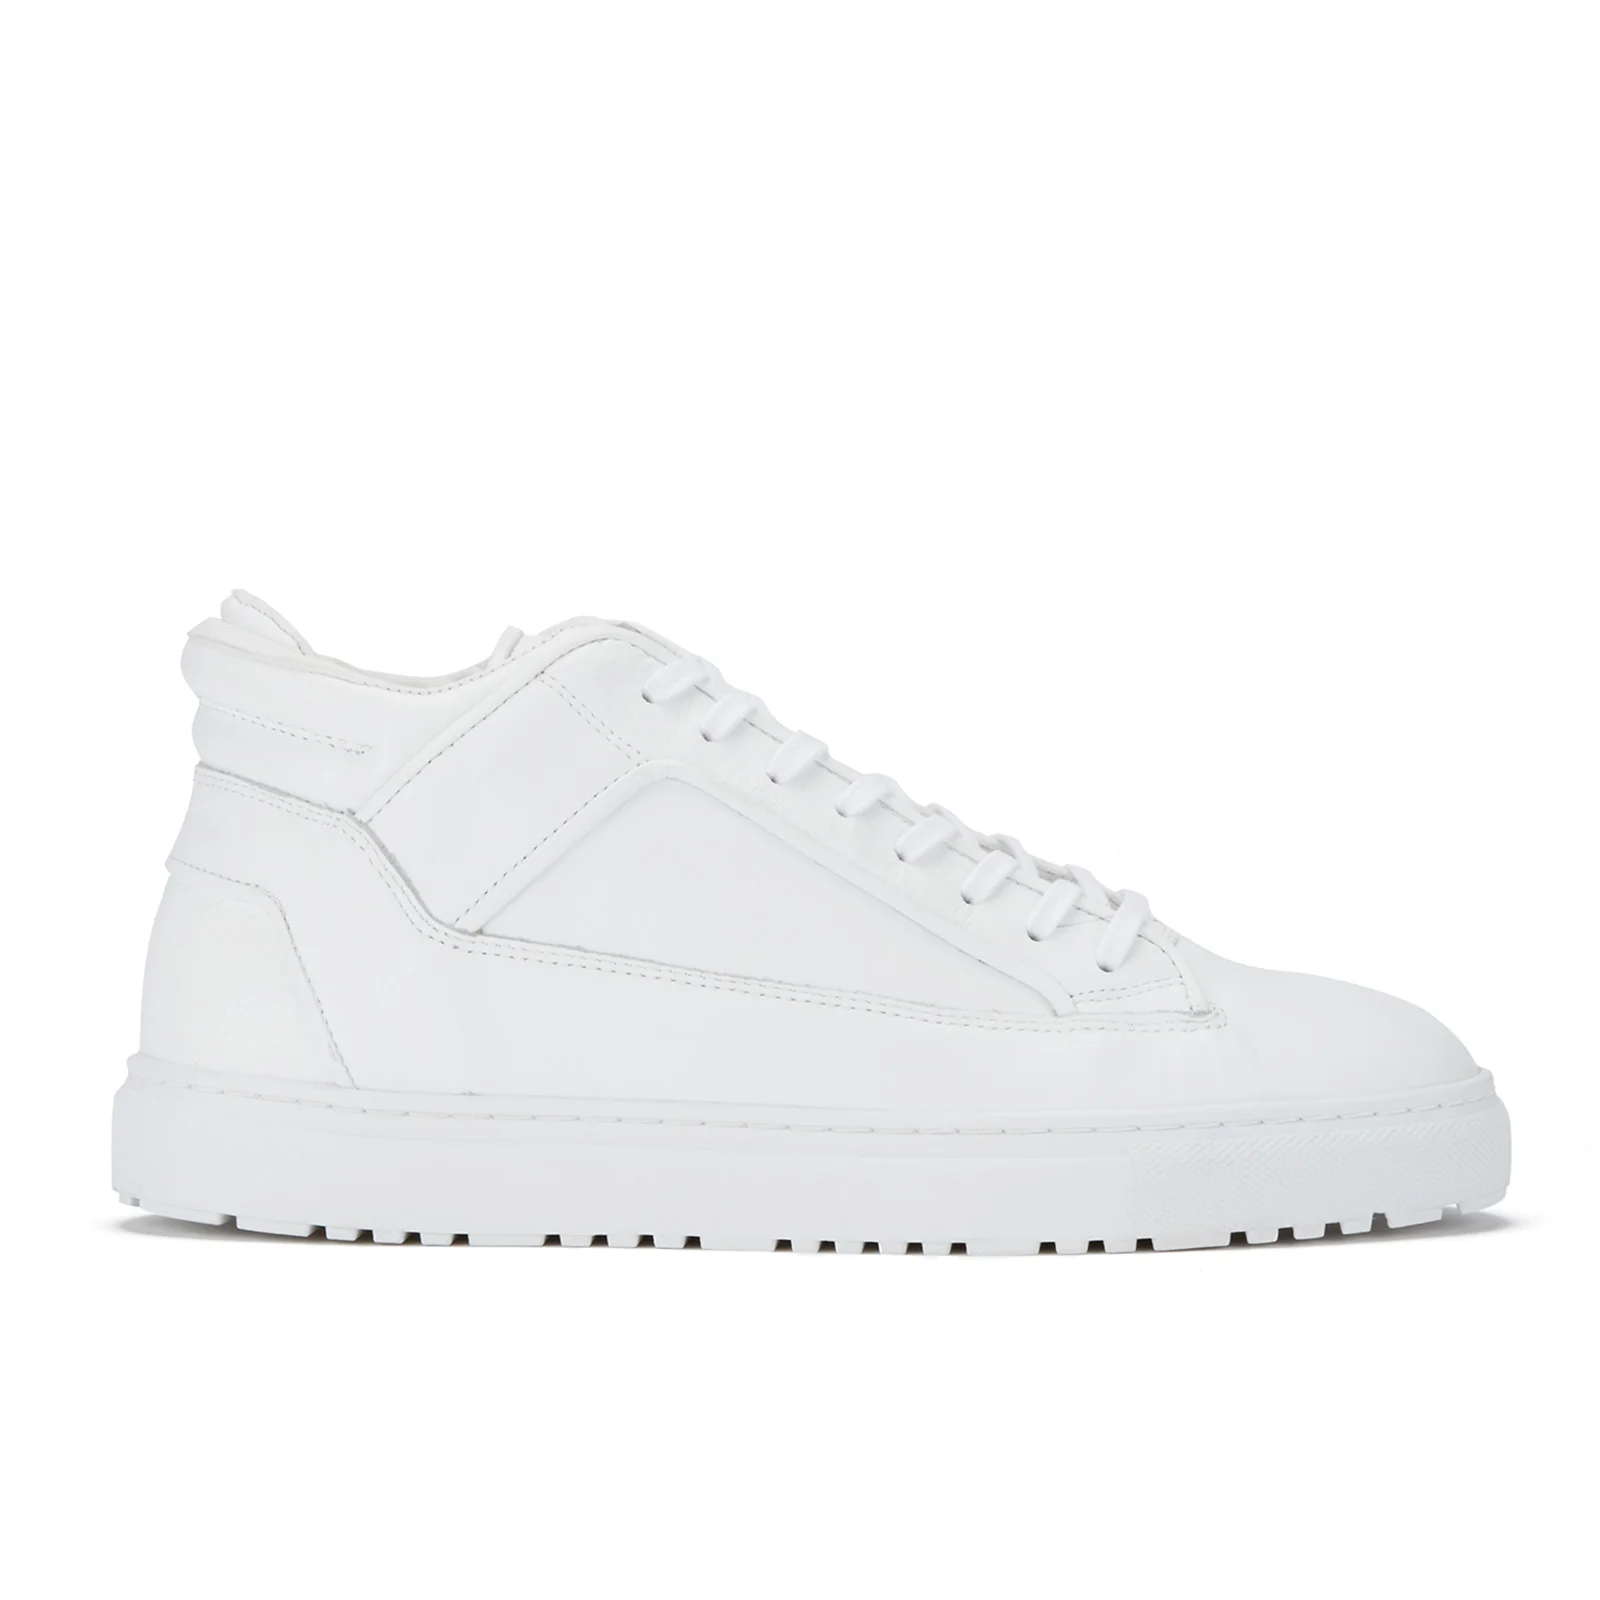 ETQ. Men's Mid Top 2 Leather Sneakers - White  Image 1